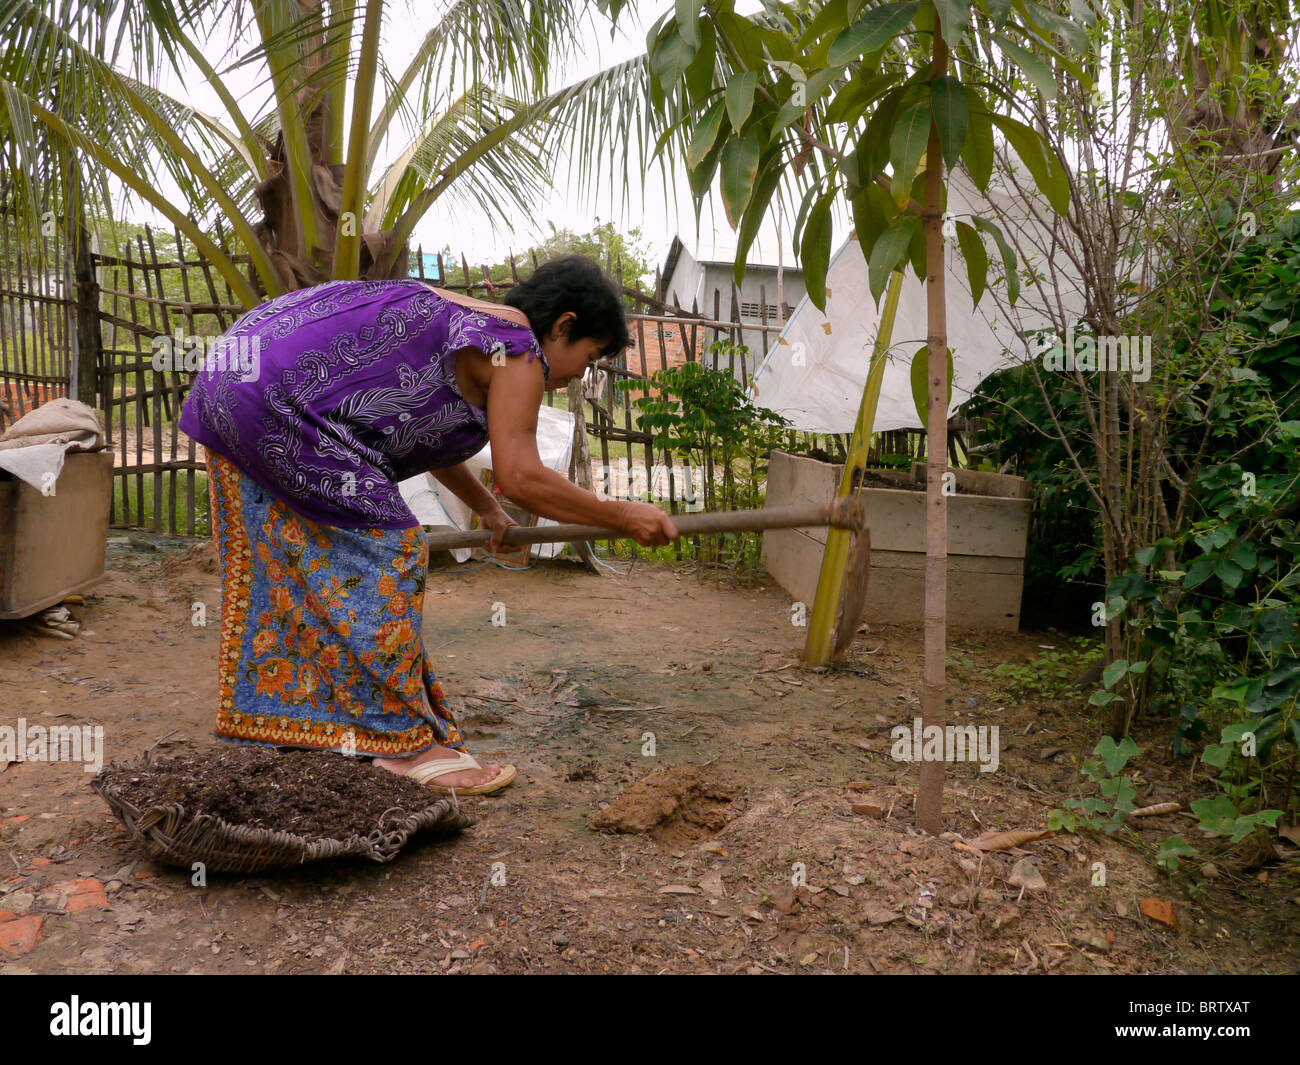 CAMBODIA Ms Hom Kimsroy, 57, who makes her wn compost at home in the settlement slum of San Sok. Stock Photo